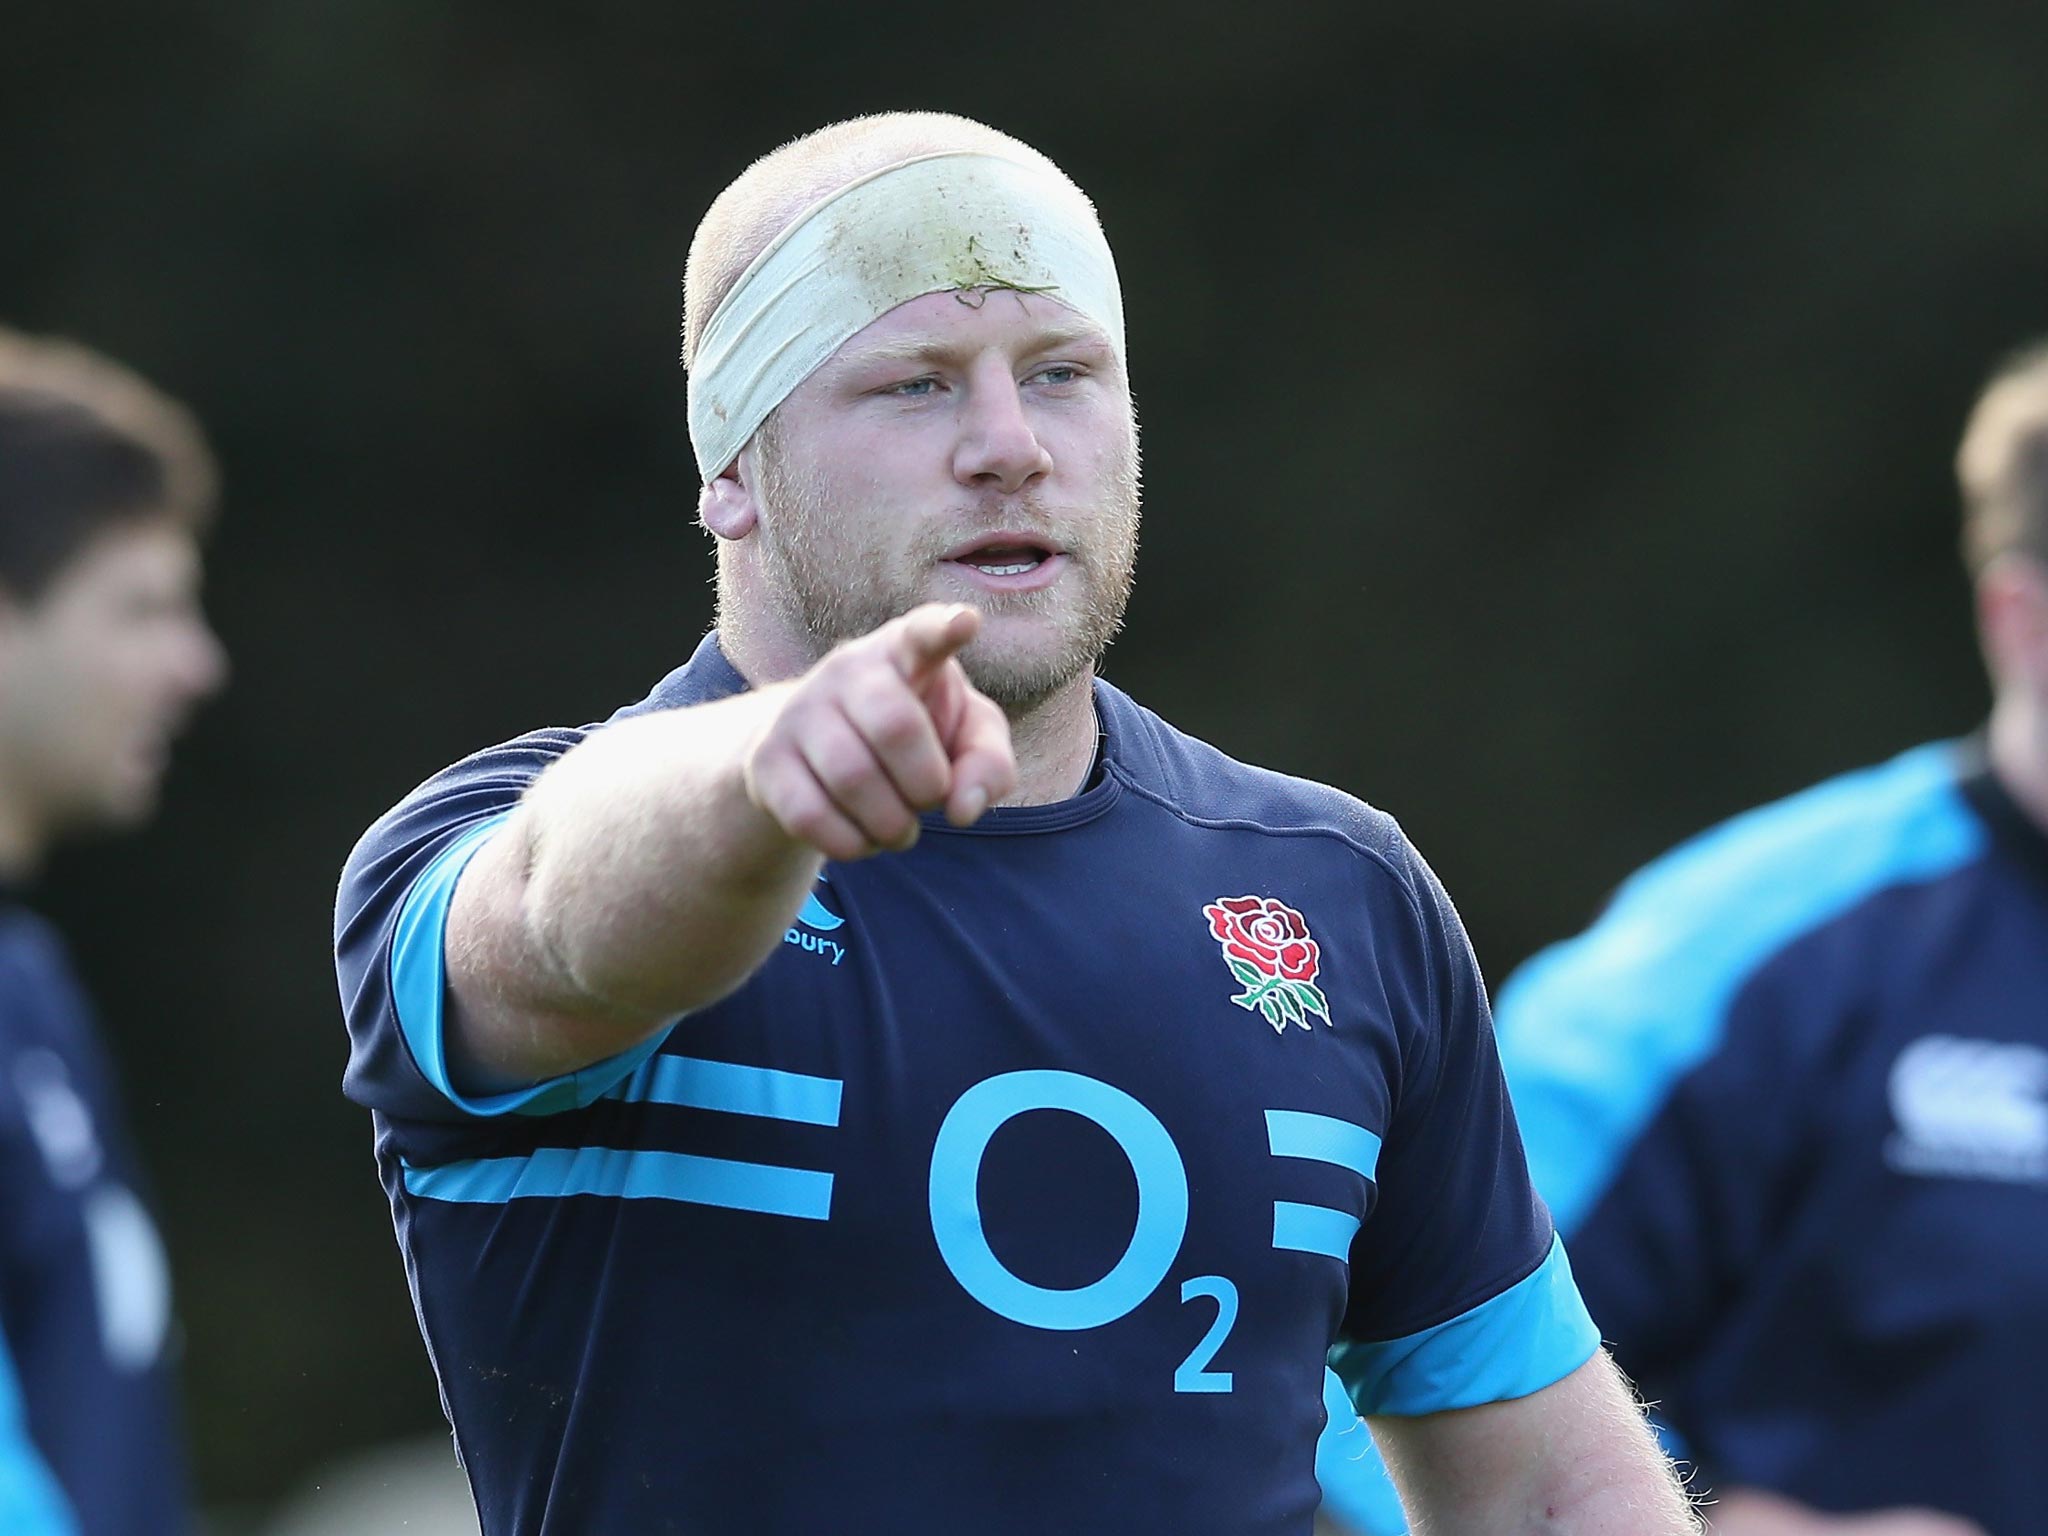 Tighthead prop Dan Cole has been ruled out of the rest of the Six Nations after sustaining a neck injury